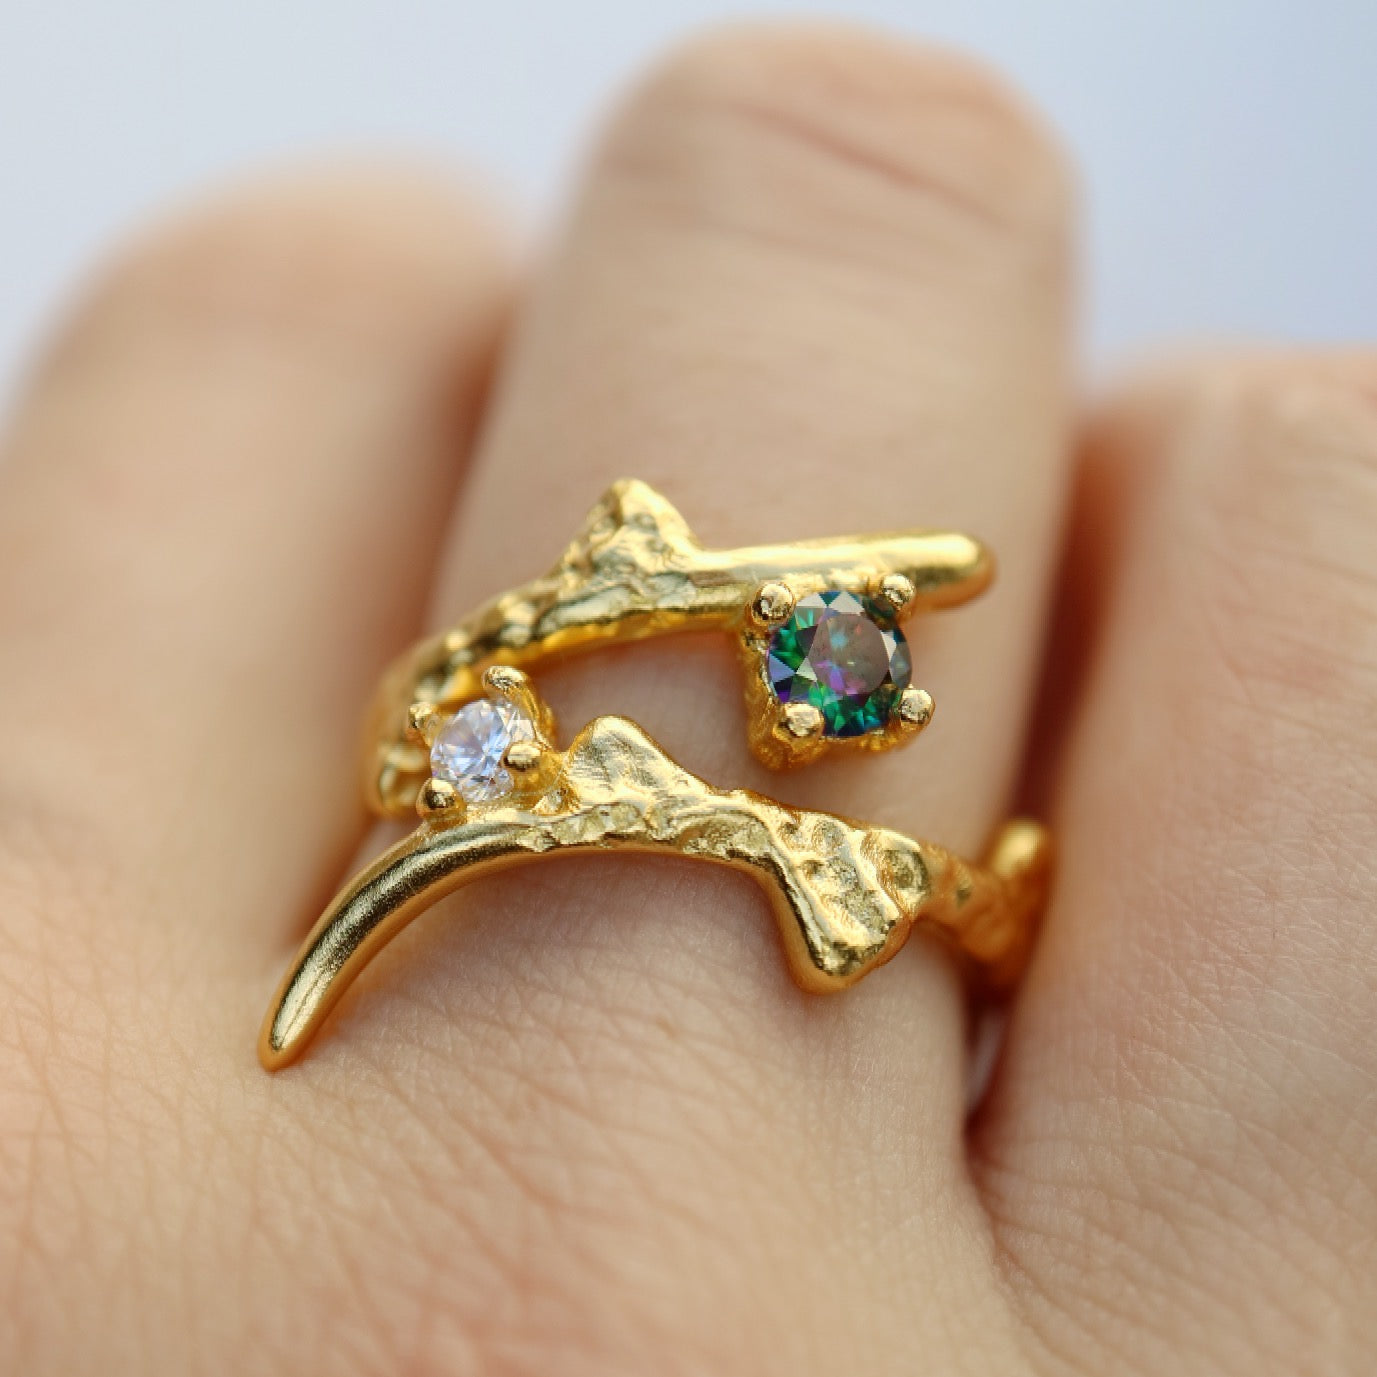 River Crossing Ring from Very Good Jewels